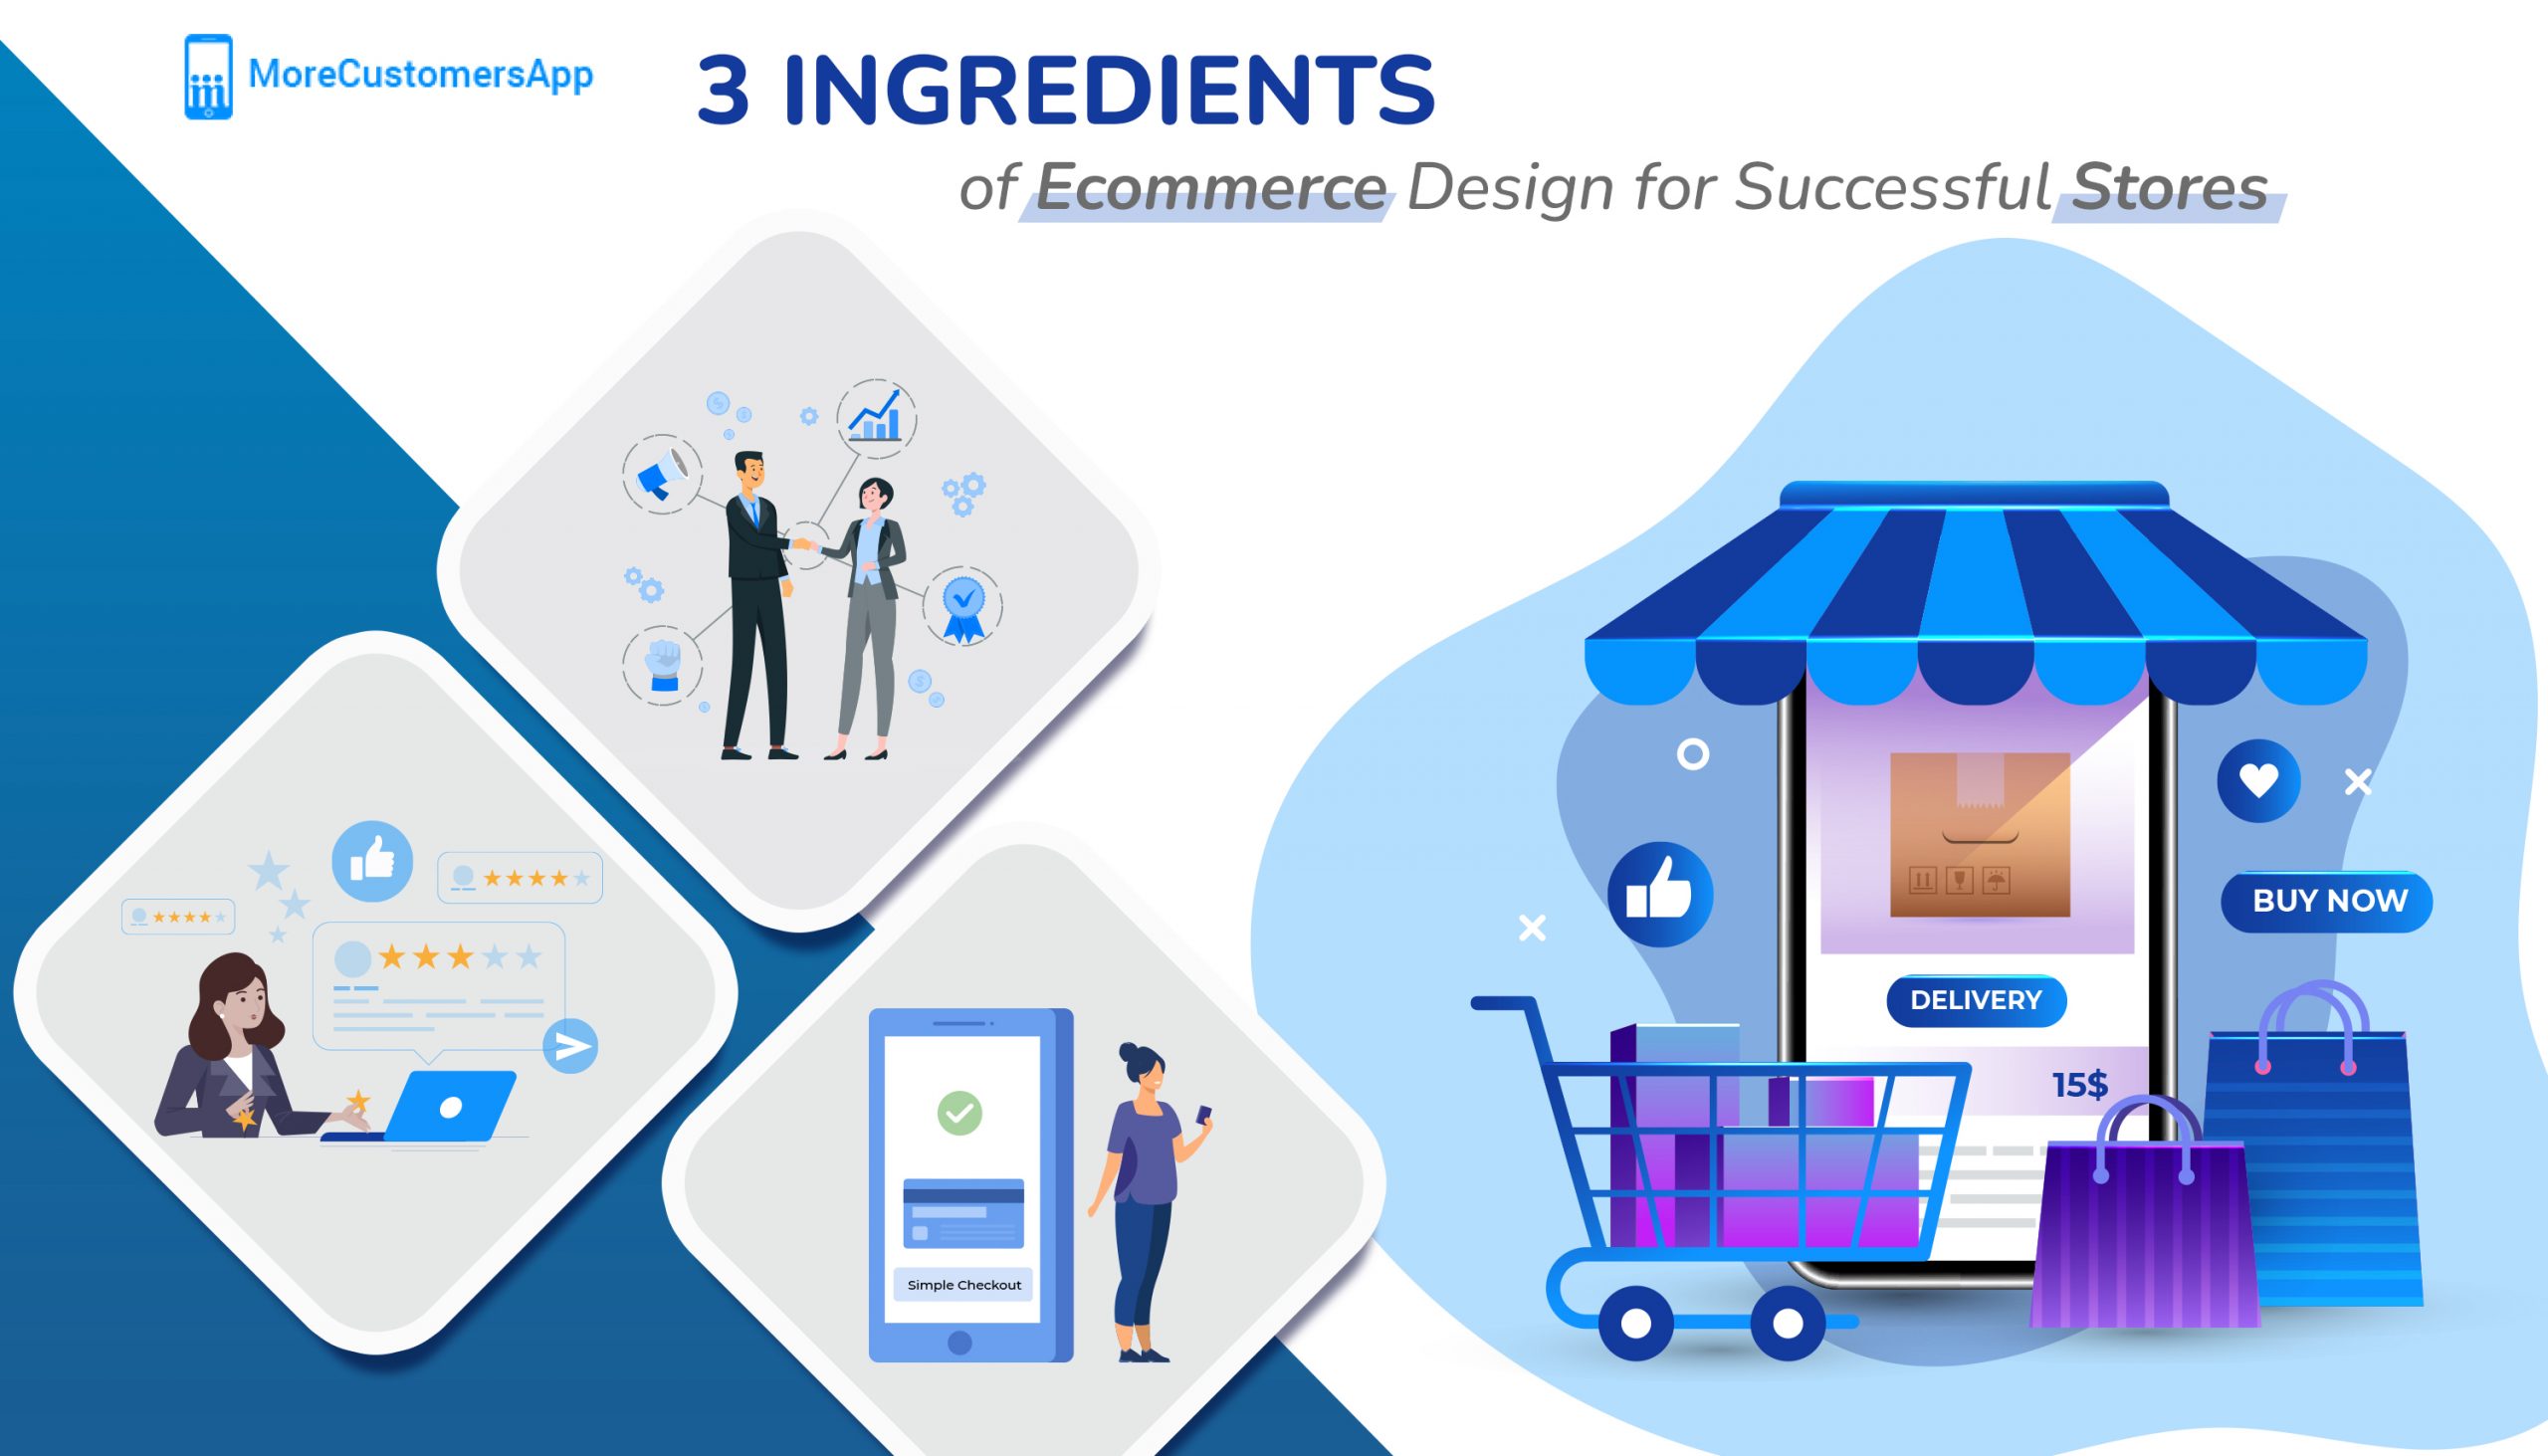 3 Essential Ingredients of Ecommerce Design for Successful Stores